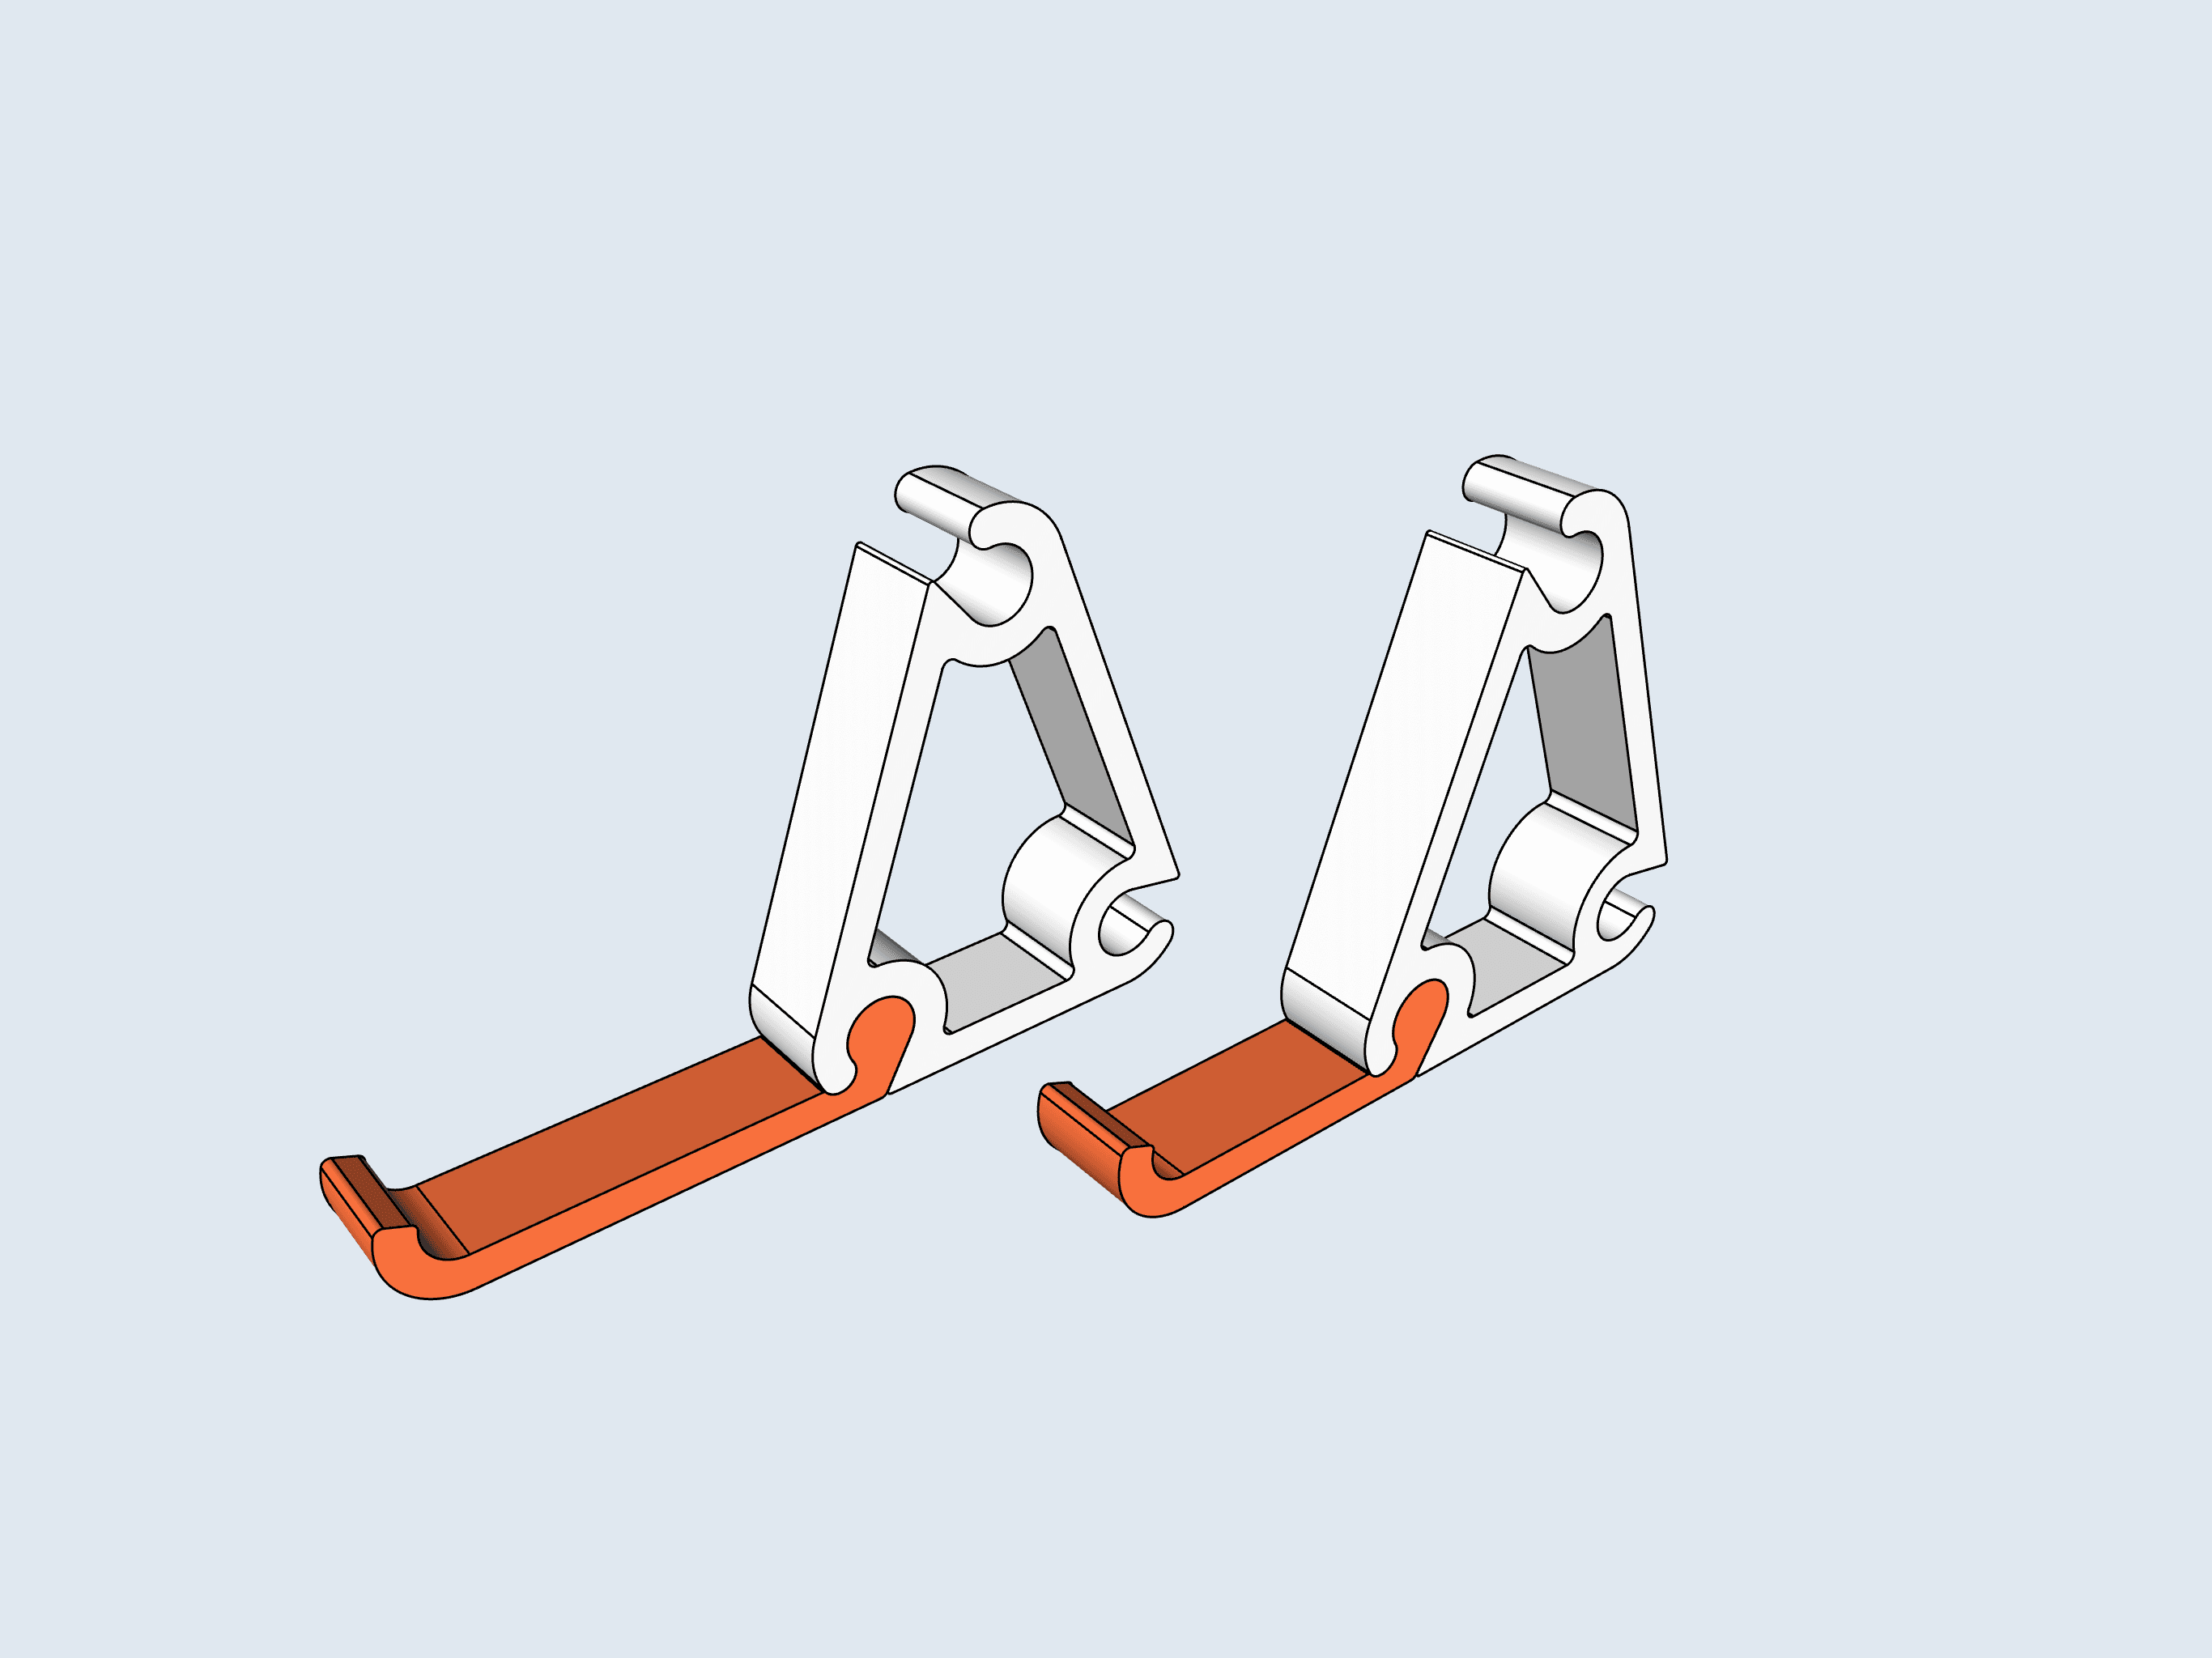  3-Way Adjustable Stand - Assembled View - 3d model